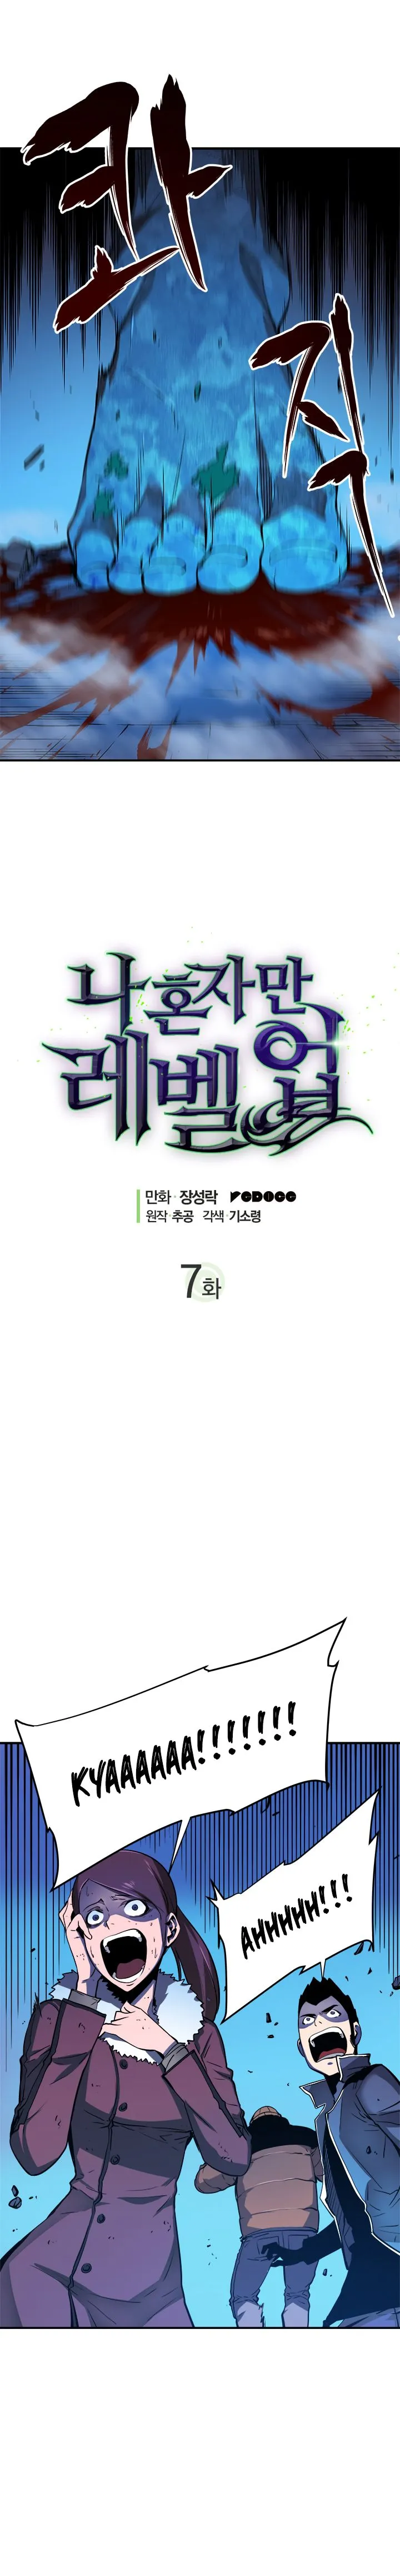 Solo leveling Chapter 007 3